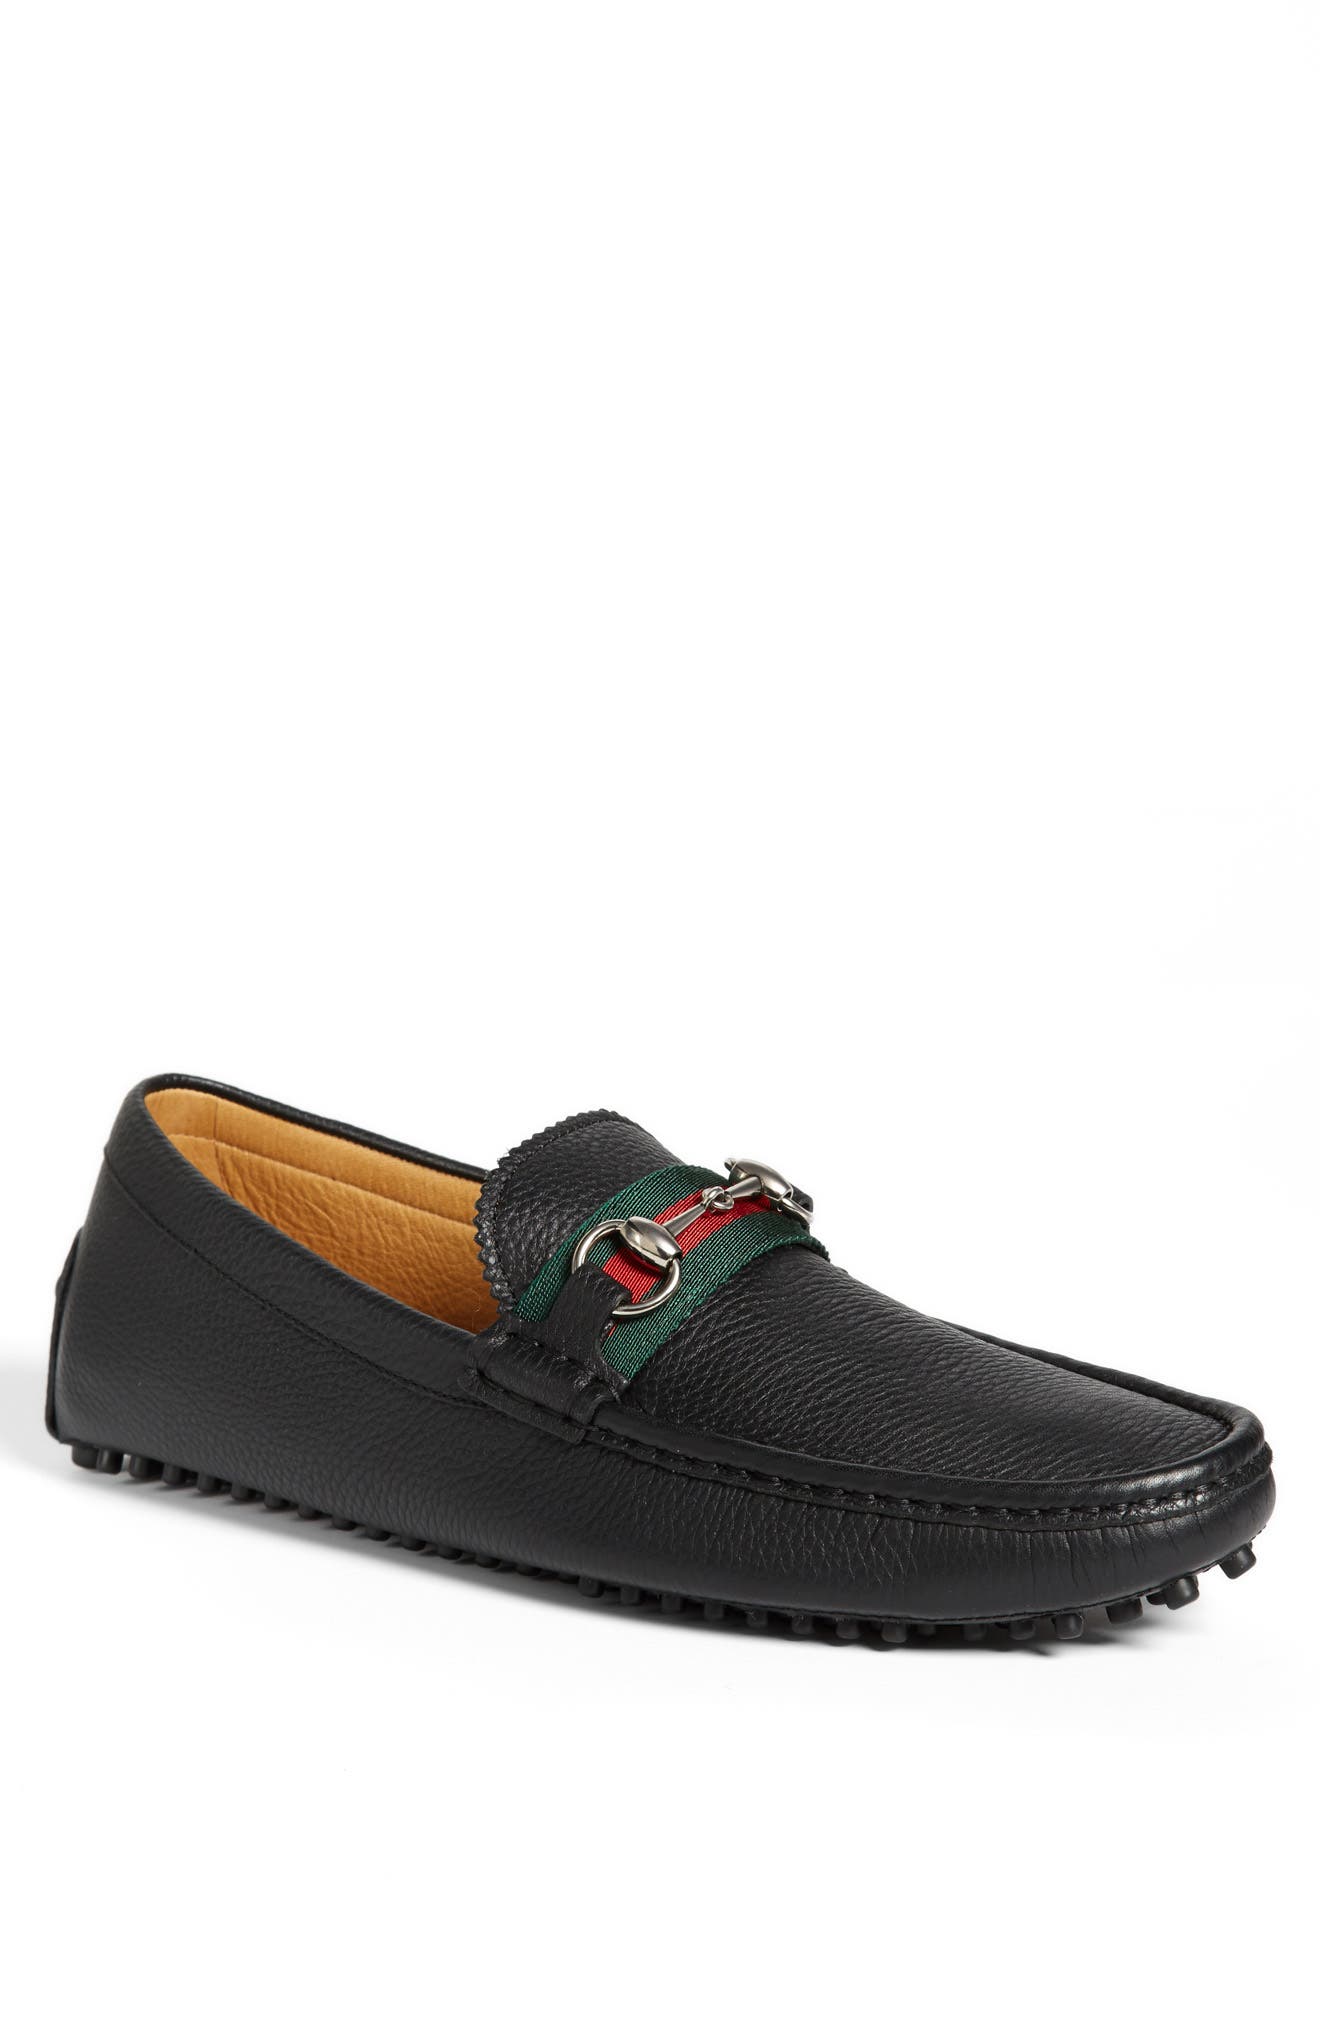 gucci driving loafer